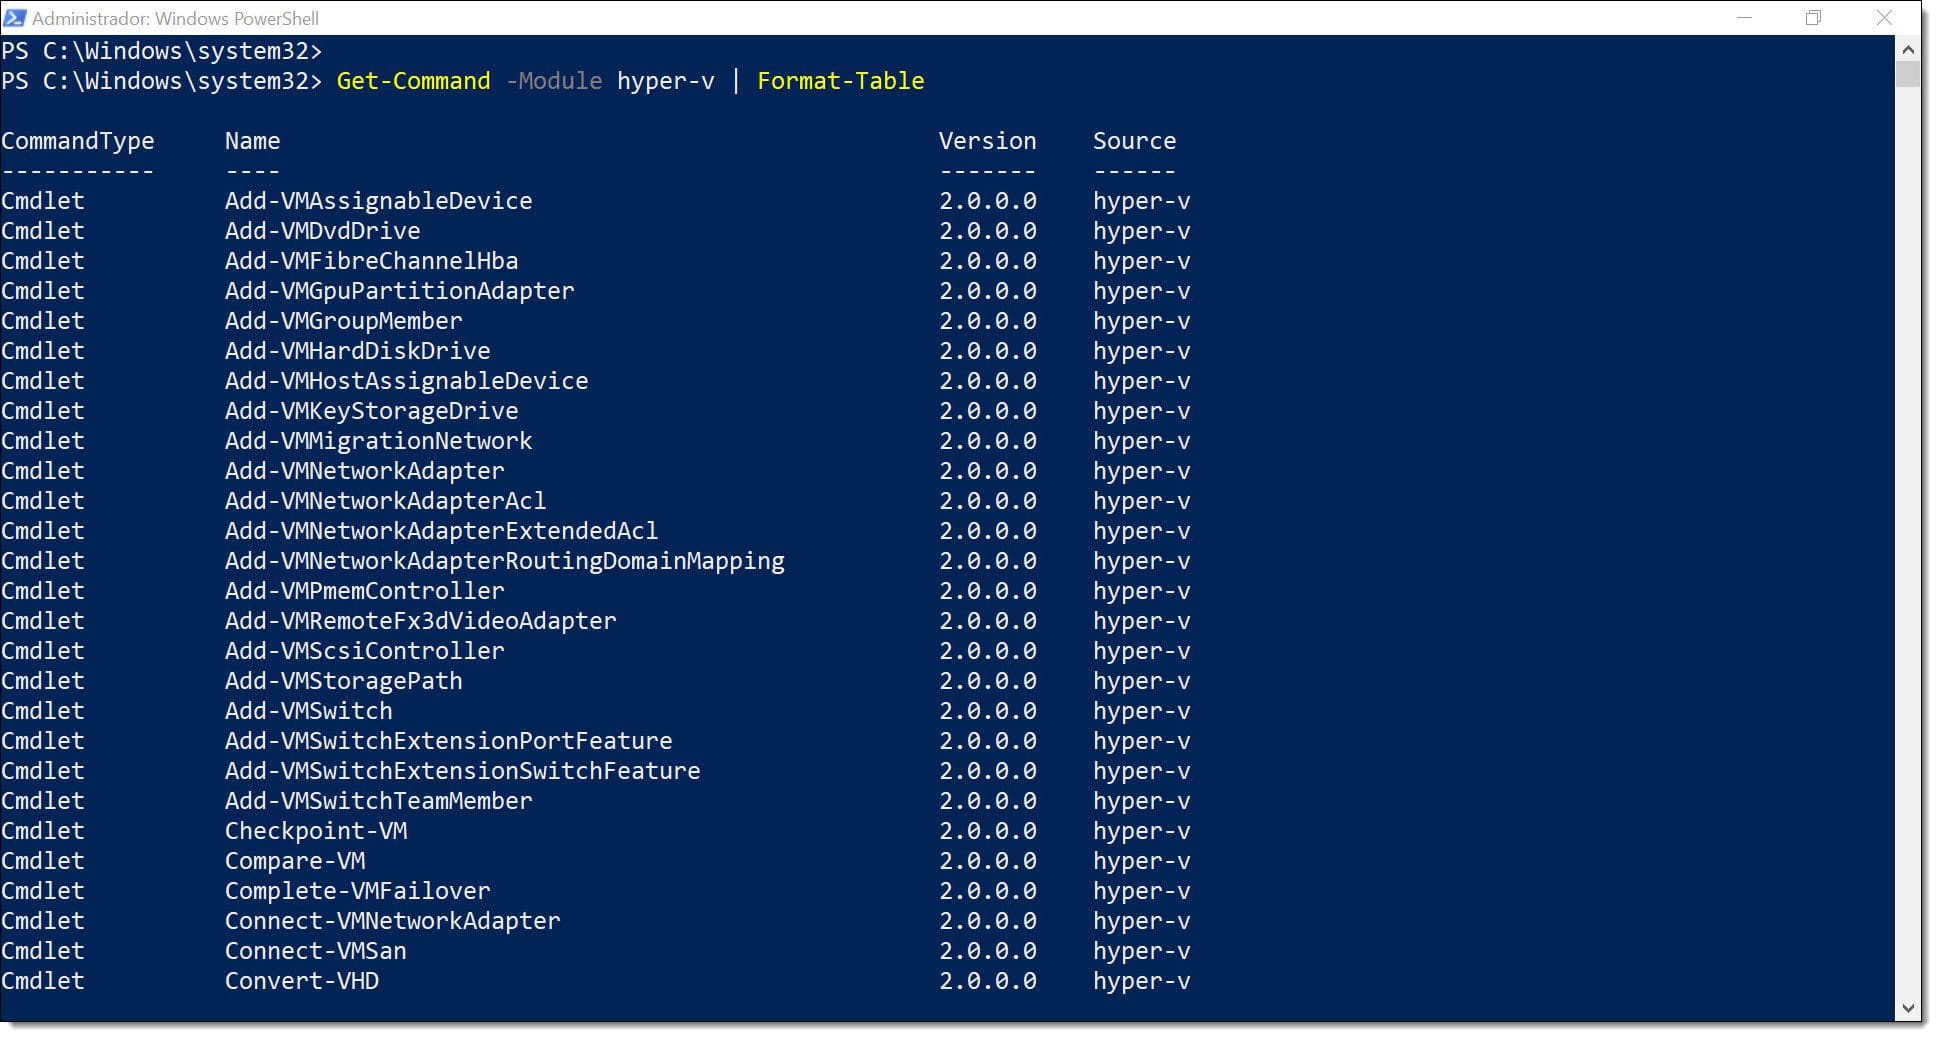 Image - Hyper-V commands in a table format